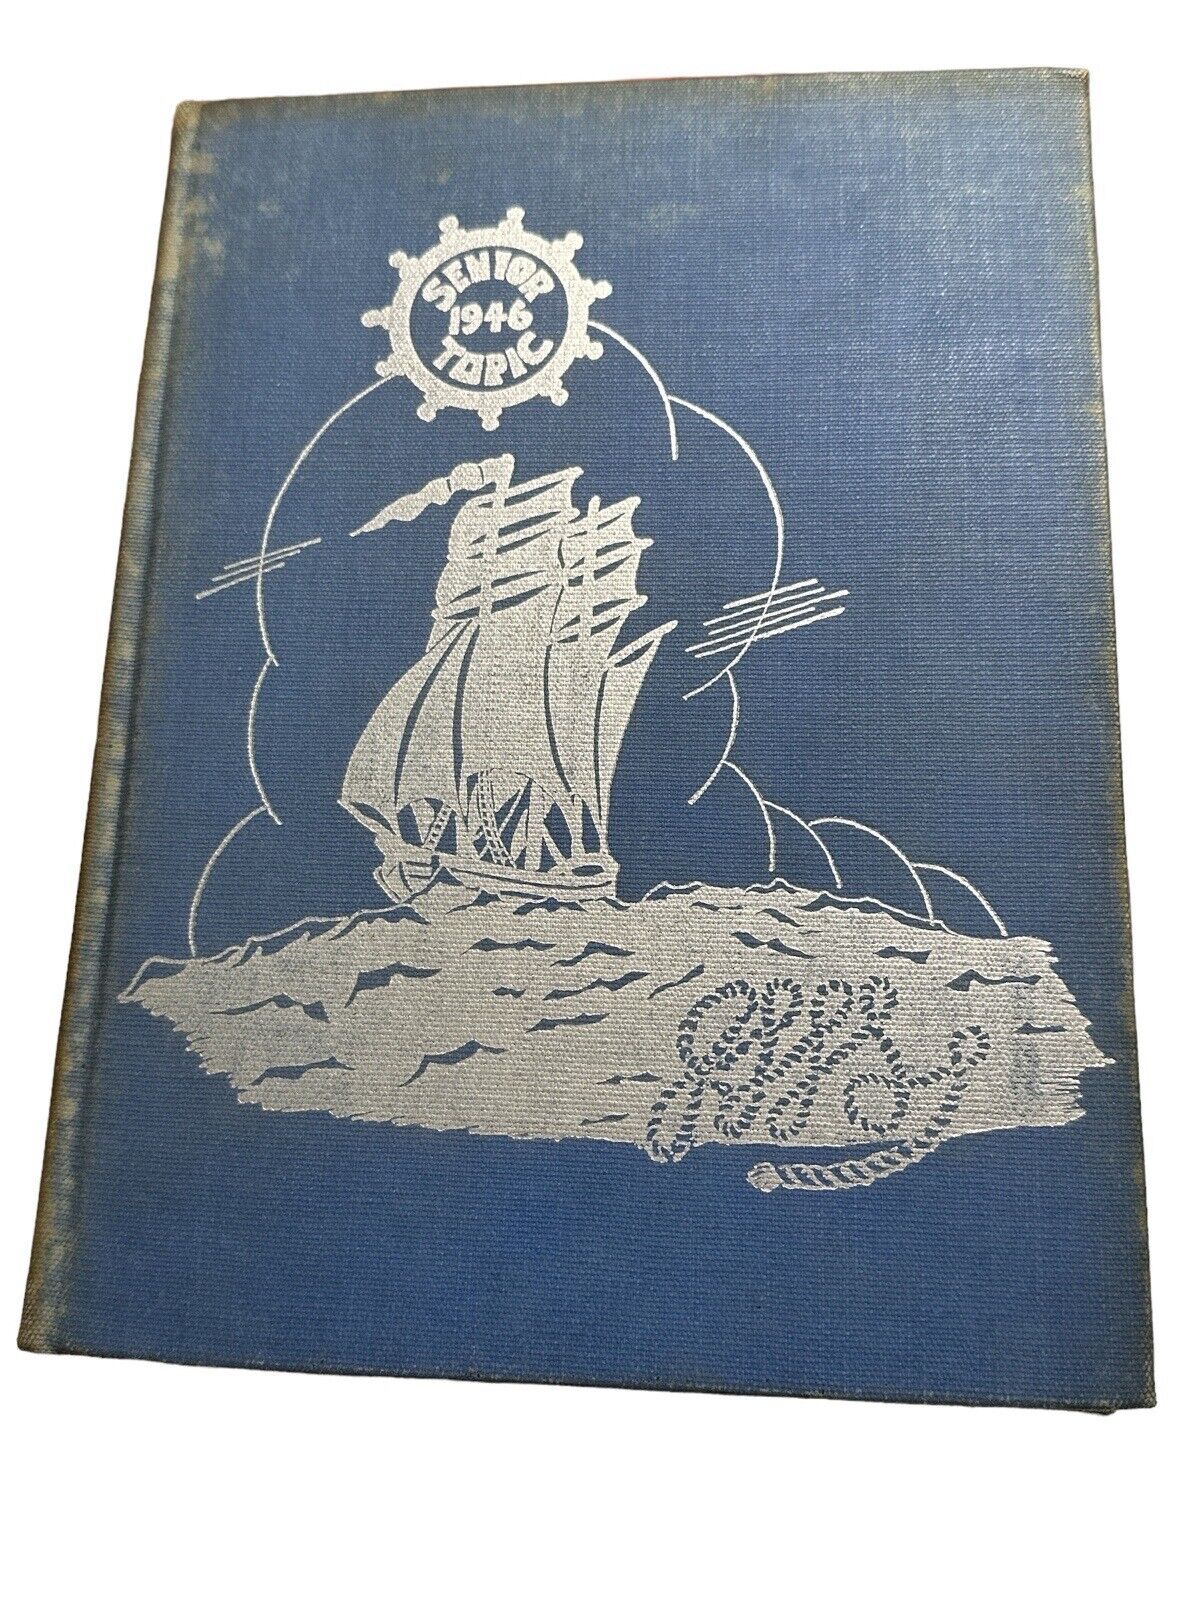 1946 TOPIC Jeffersonville High School Indiana Class Of 1946 Yearbook Hyphen Copy